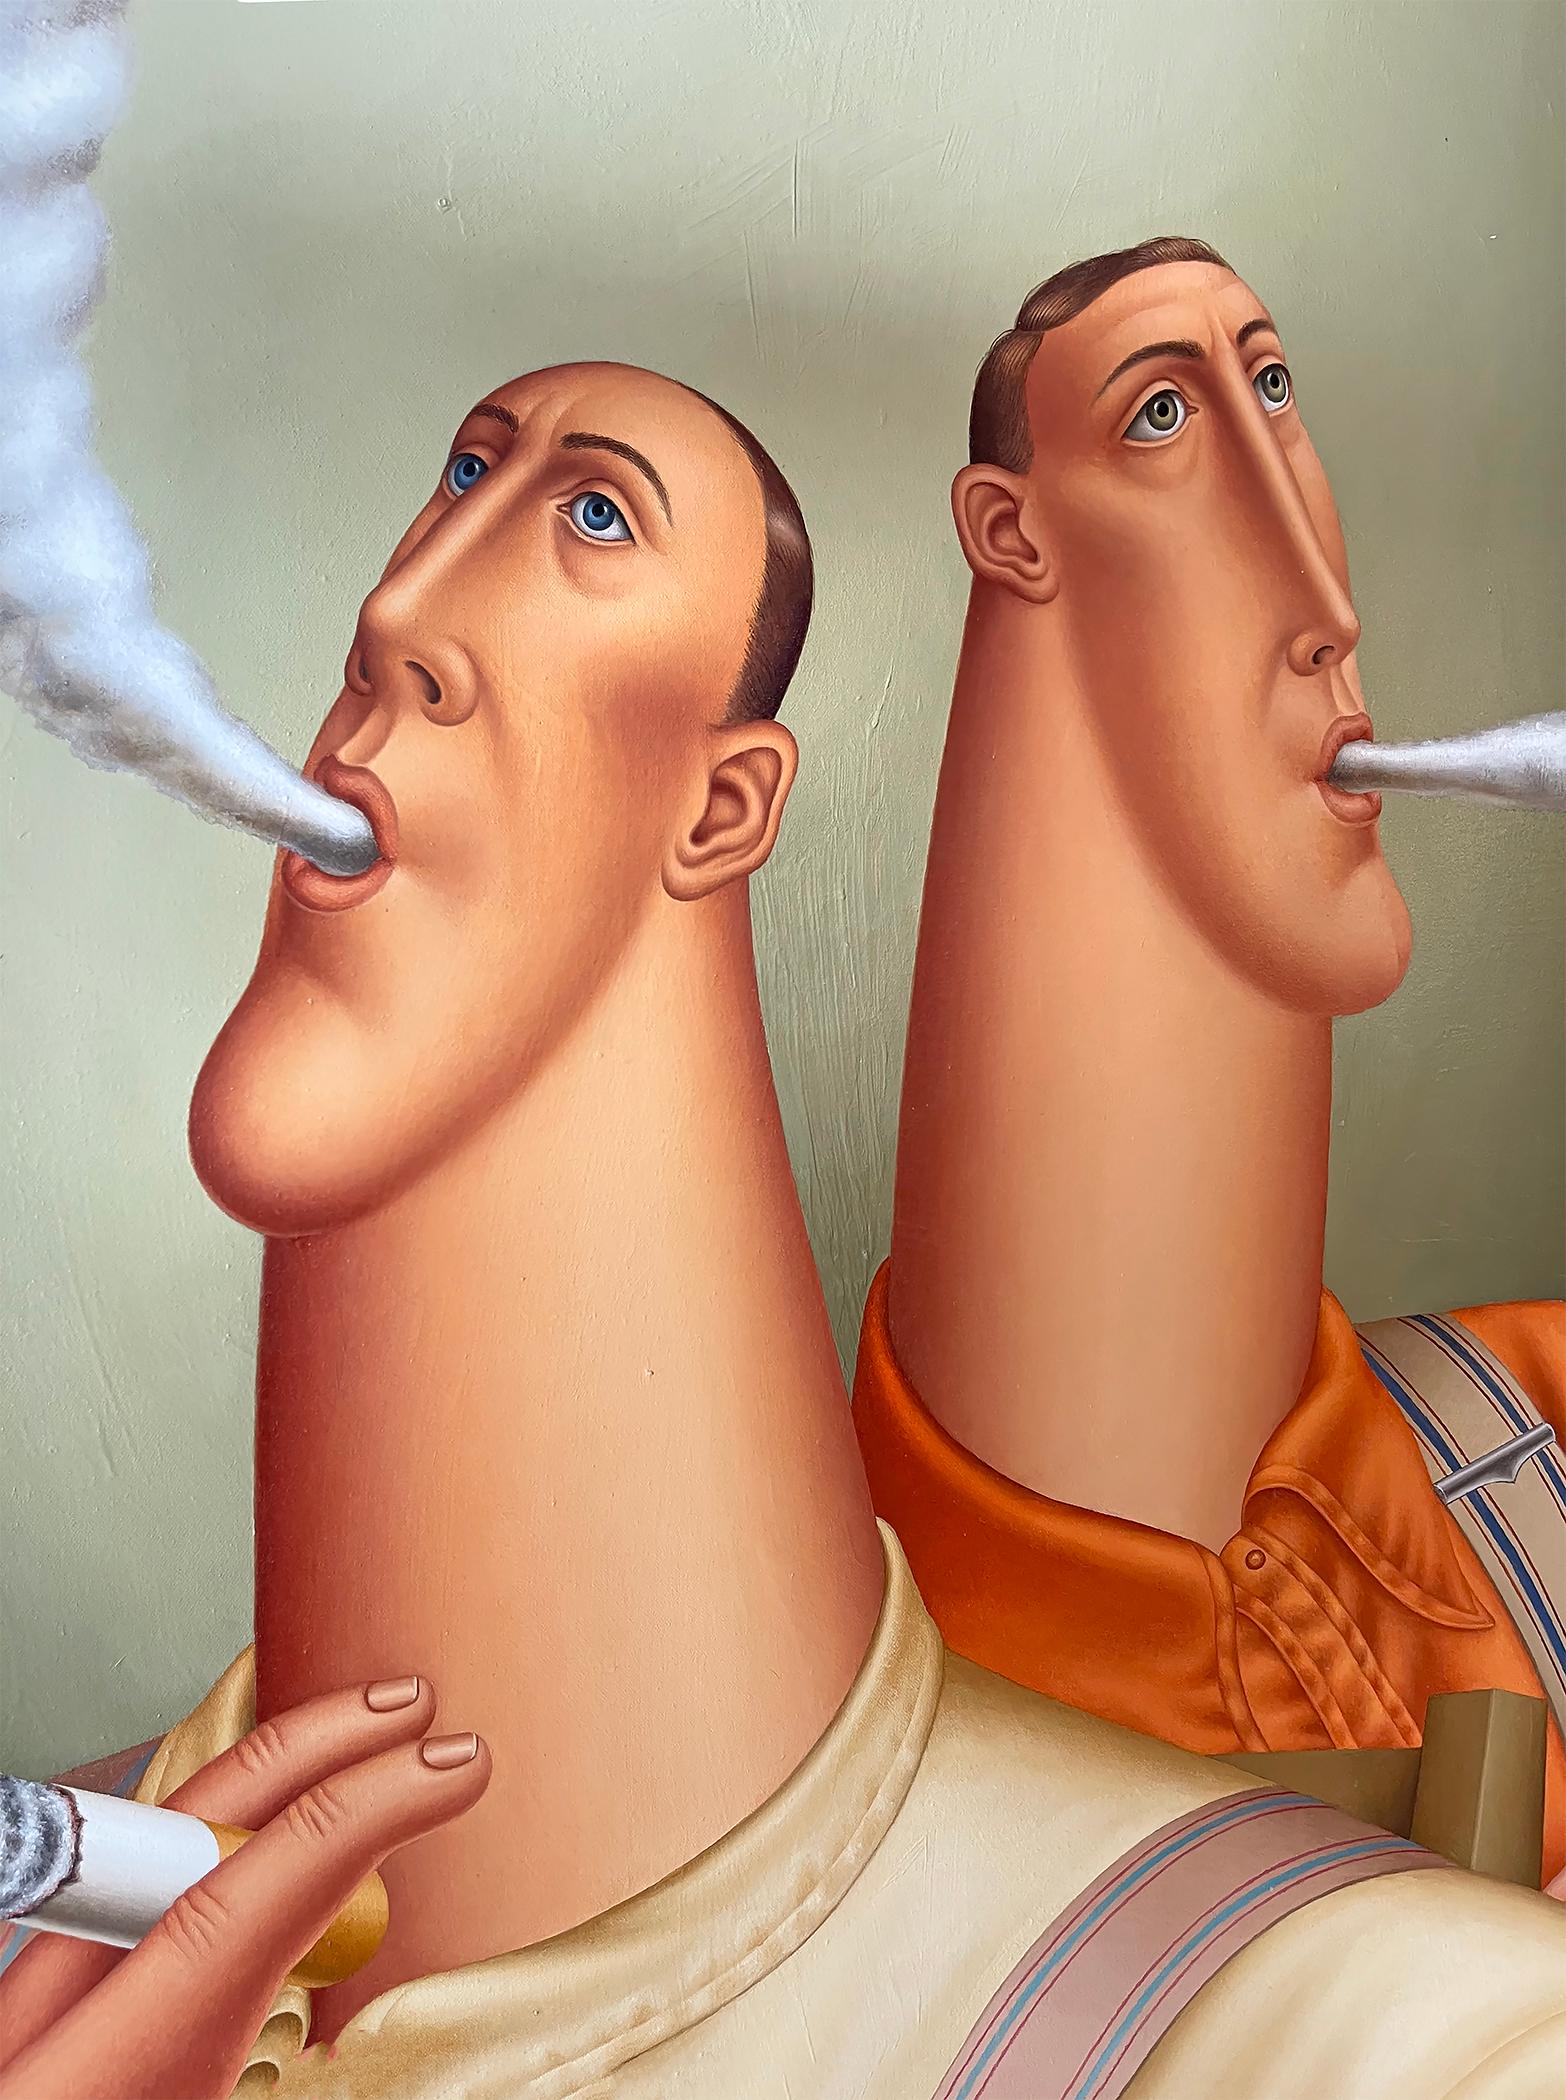 Three Smokers, Roy Carruthers 3